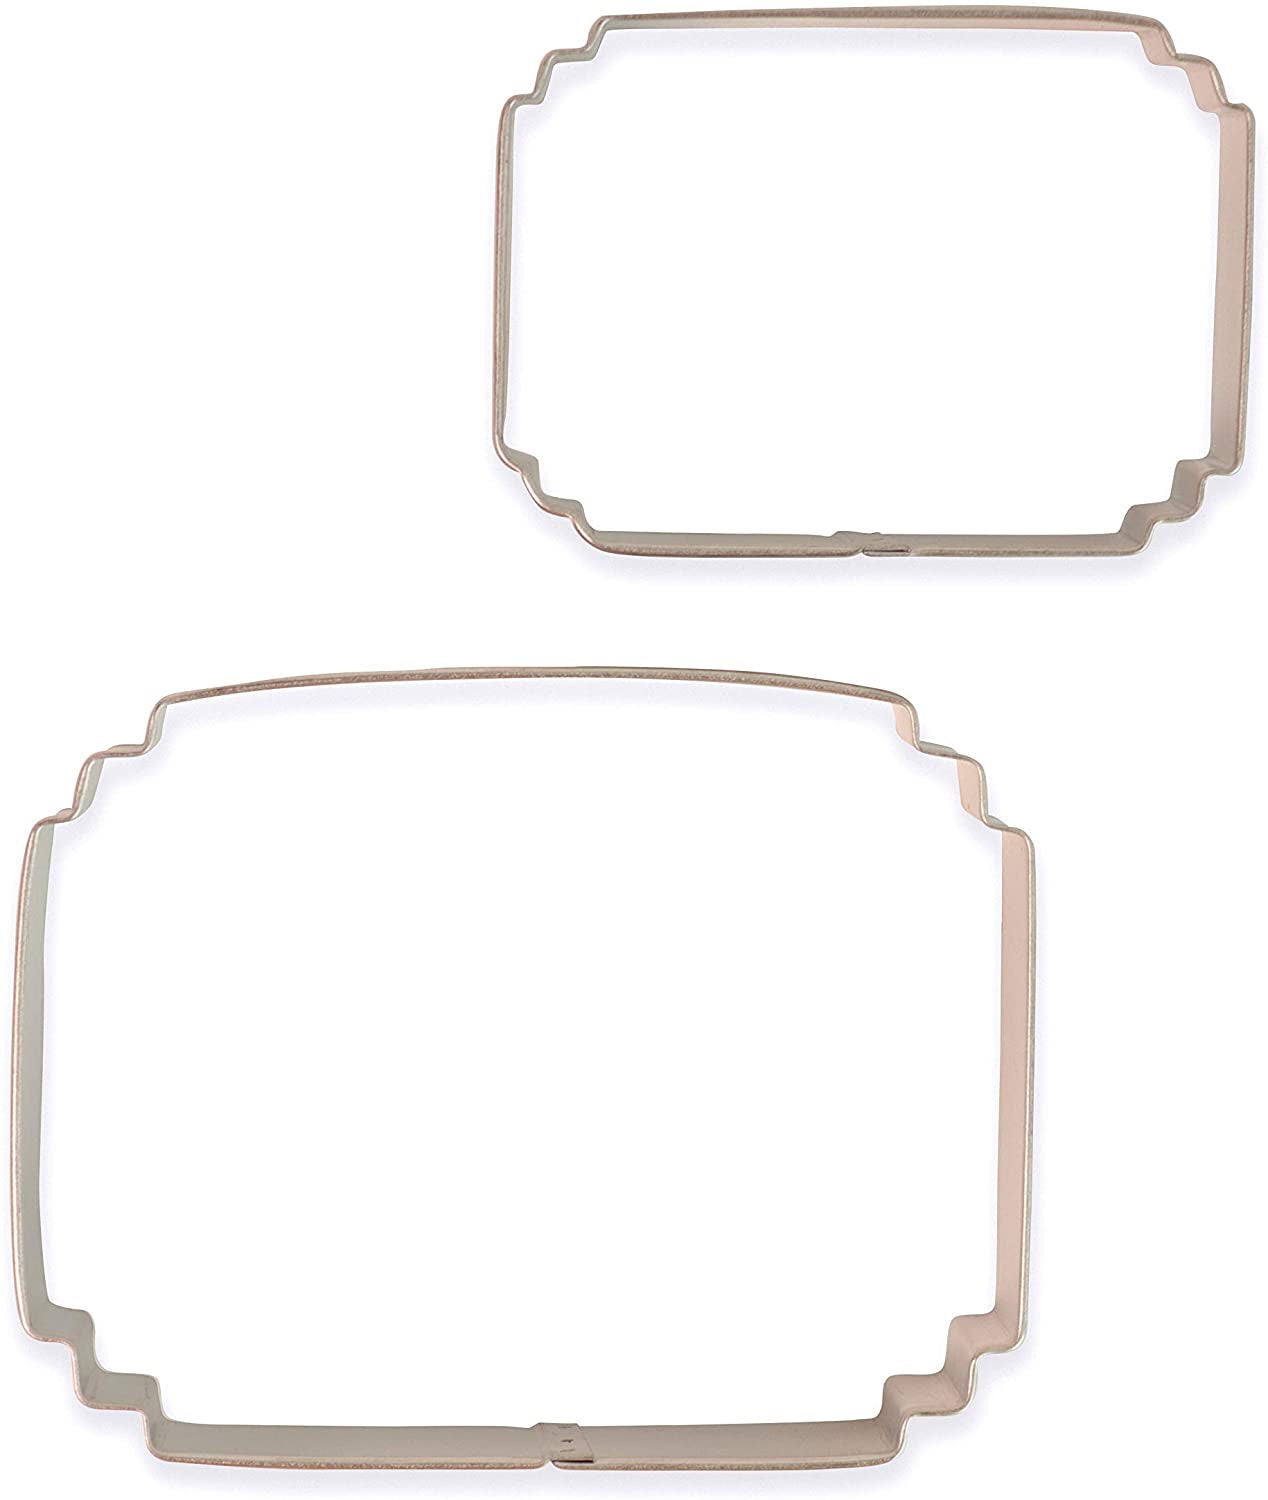 PME Rectangular Plaque Cookie Cutter - Set of 2 Cookie Cutters